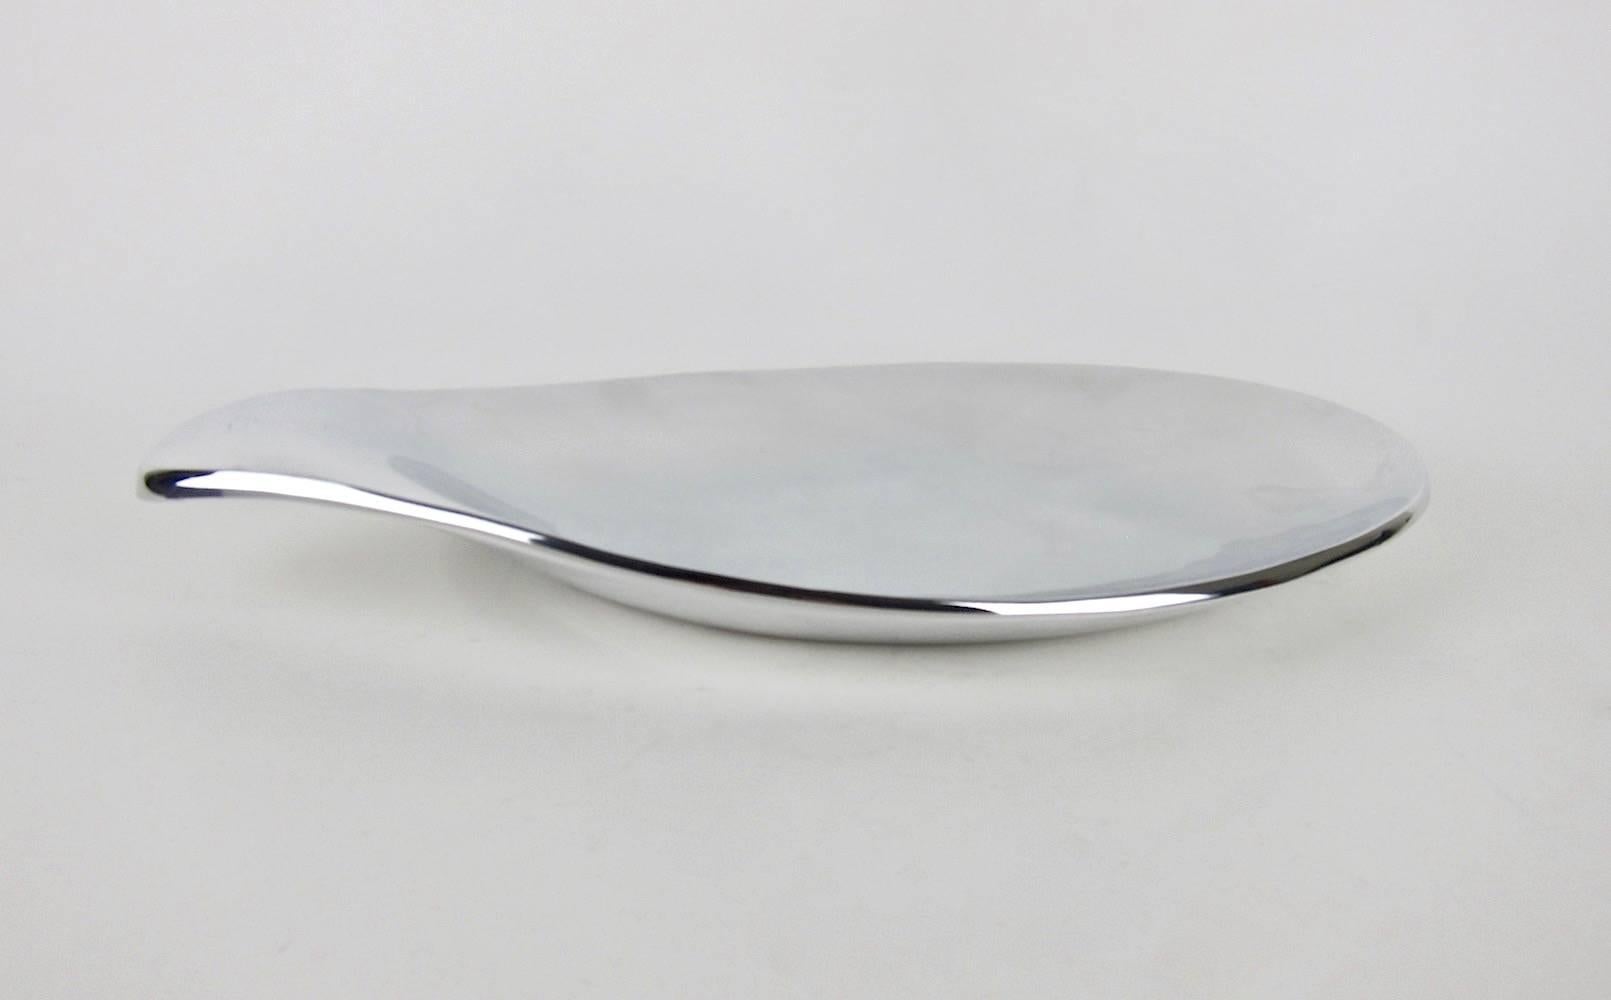 A 17-Inch long biomorphic silver metal platter designed by Eva Zeisel (1906–2011). Zeisel designed this sculptural serving piece for Nambe of New Mexico in 1999, basing the form on one of her mid-century designs for Hall China Company's Tomorrow’s